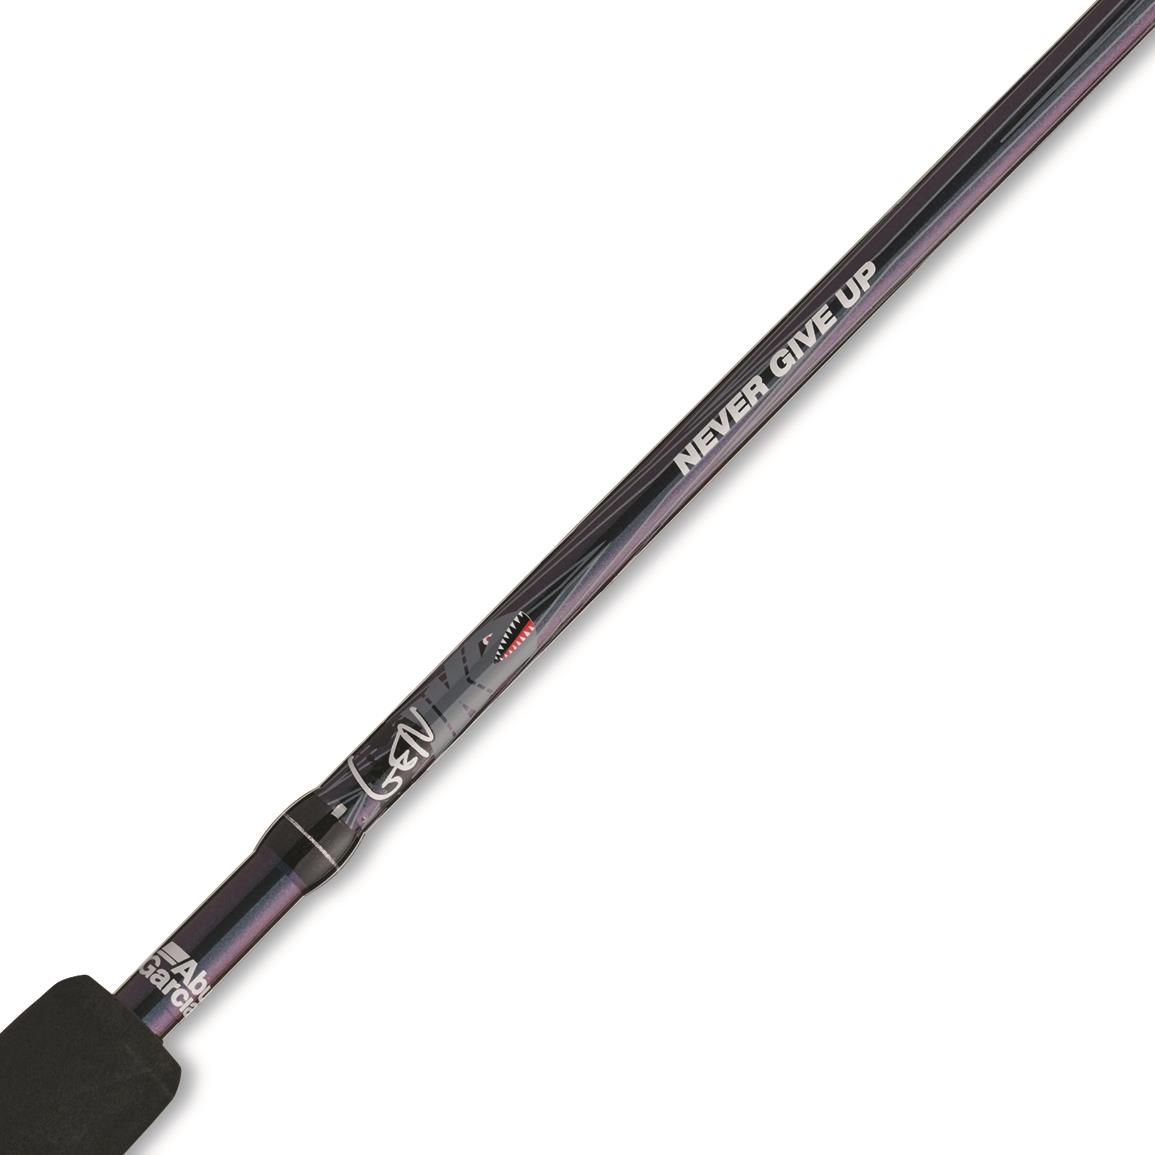 13 Fishing Intent GTS Spinning Combo, 7'1 Length, Medium Heavy Power, 3000  Reel Size - 729837, Spinning Combos at Sportsman's Guide